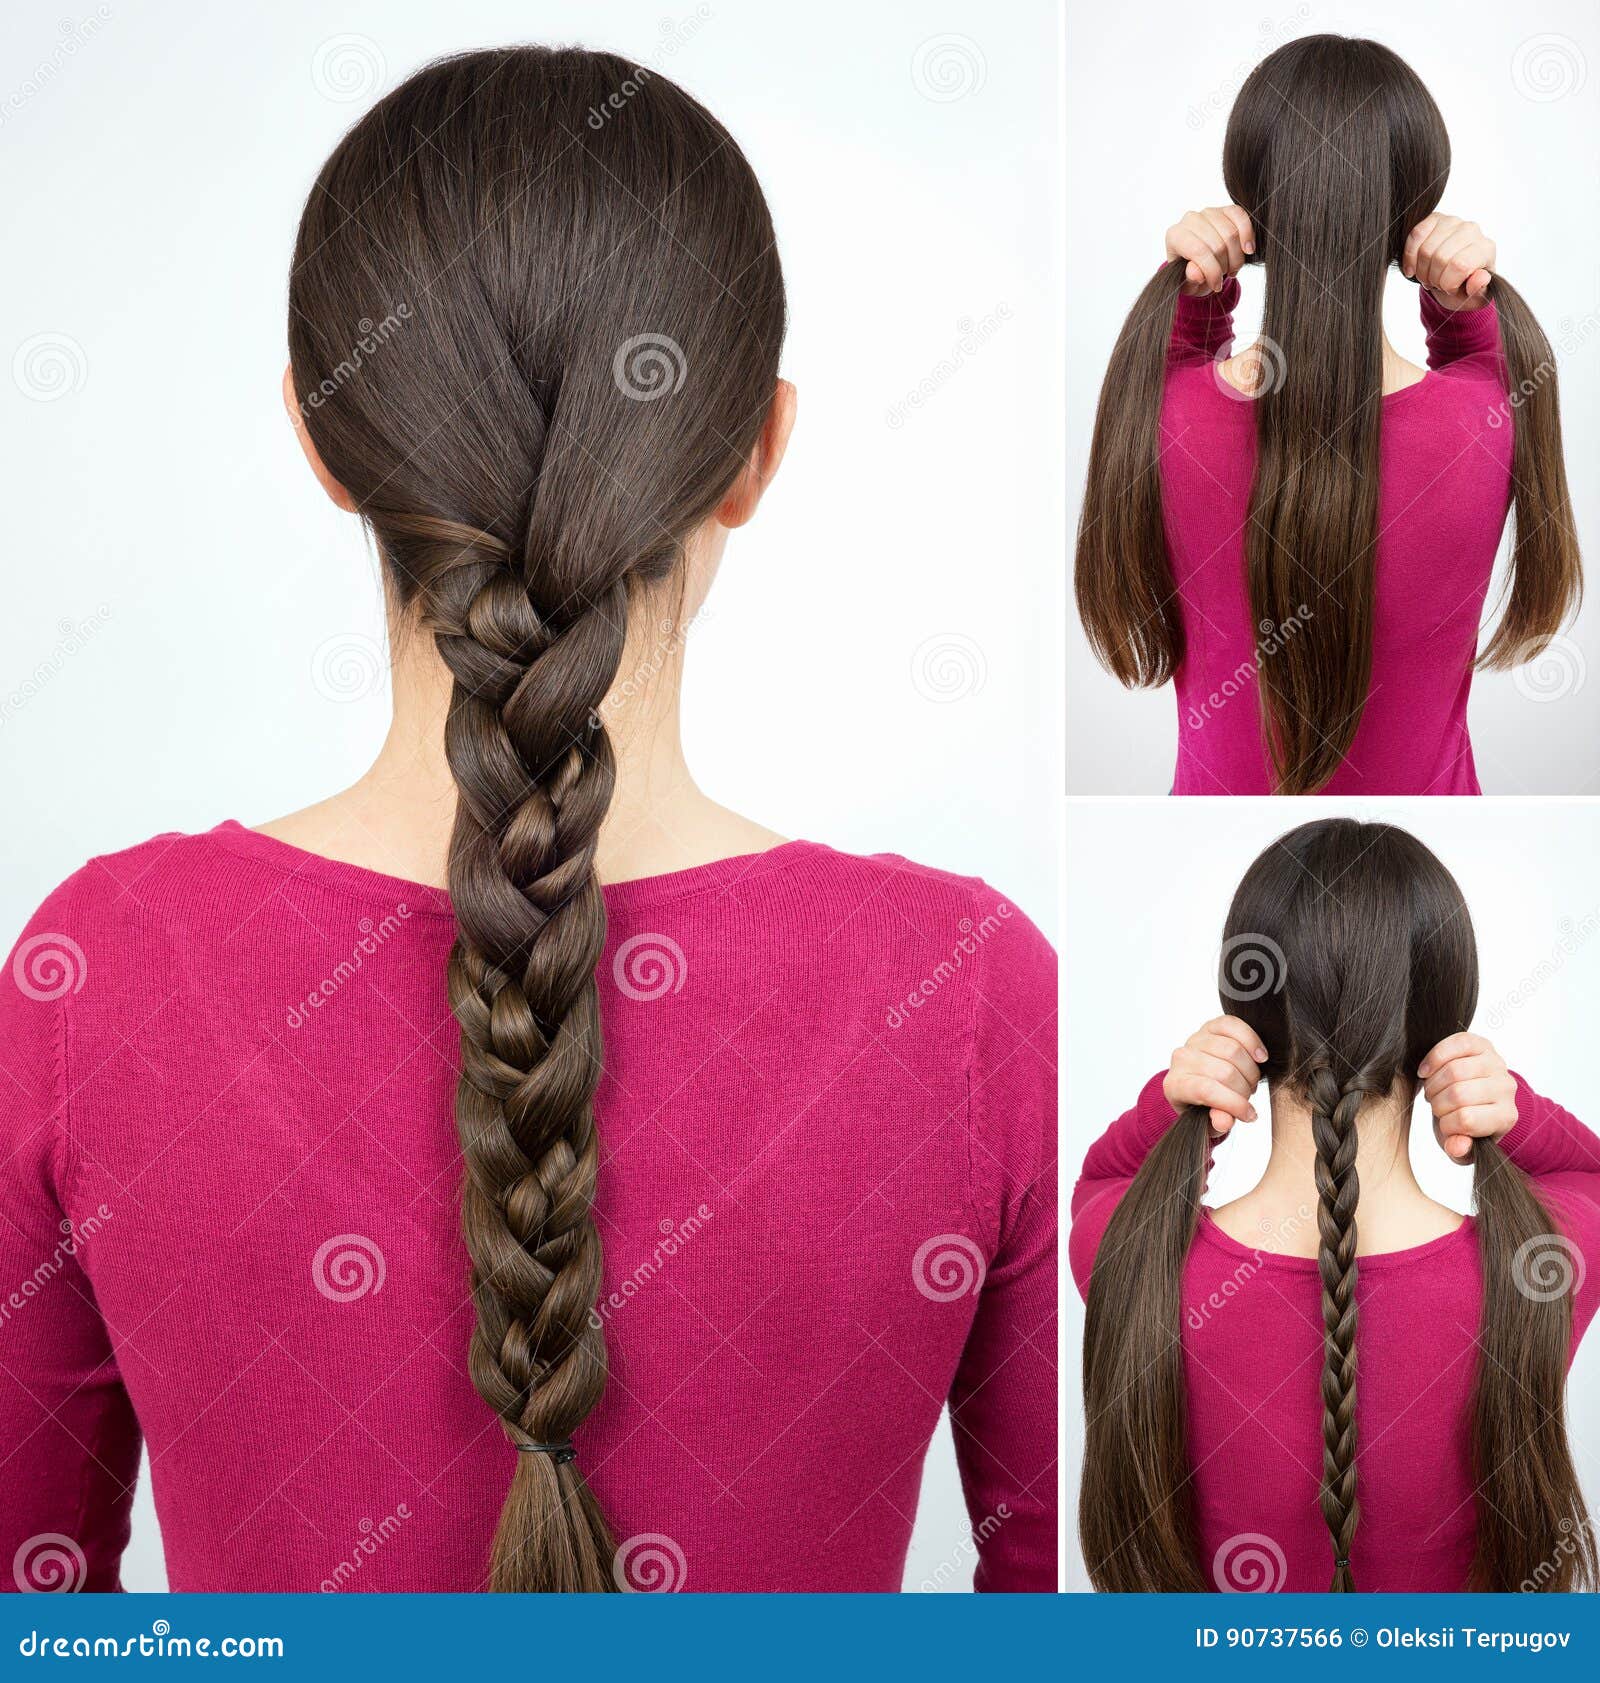 Tutorial Photo Step By Step Simple Stock Photo 670653604 | Shutterstock